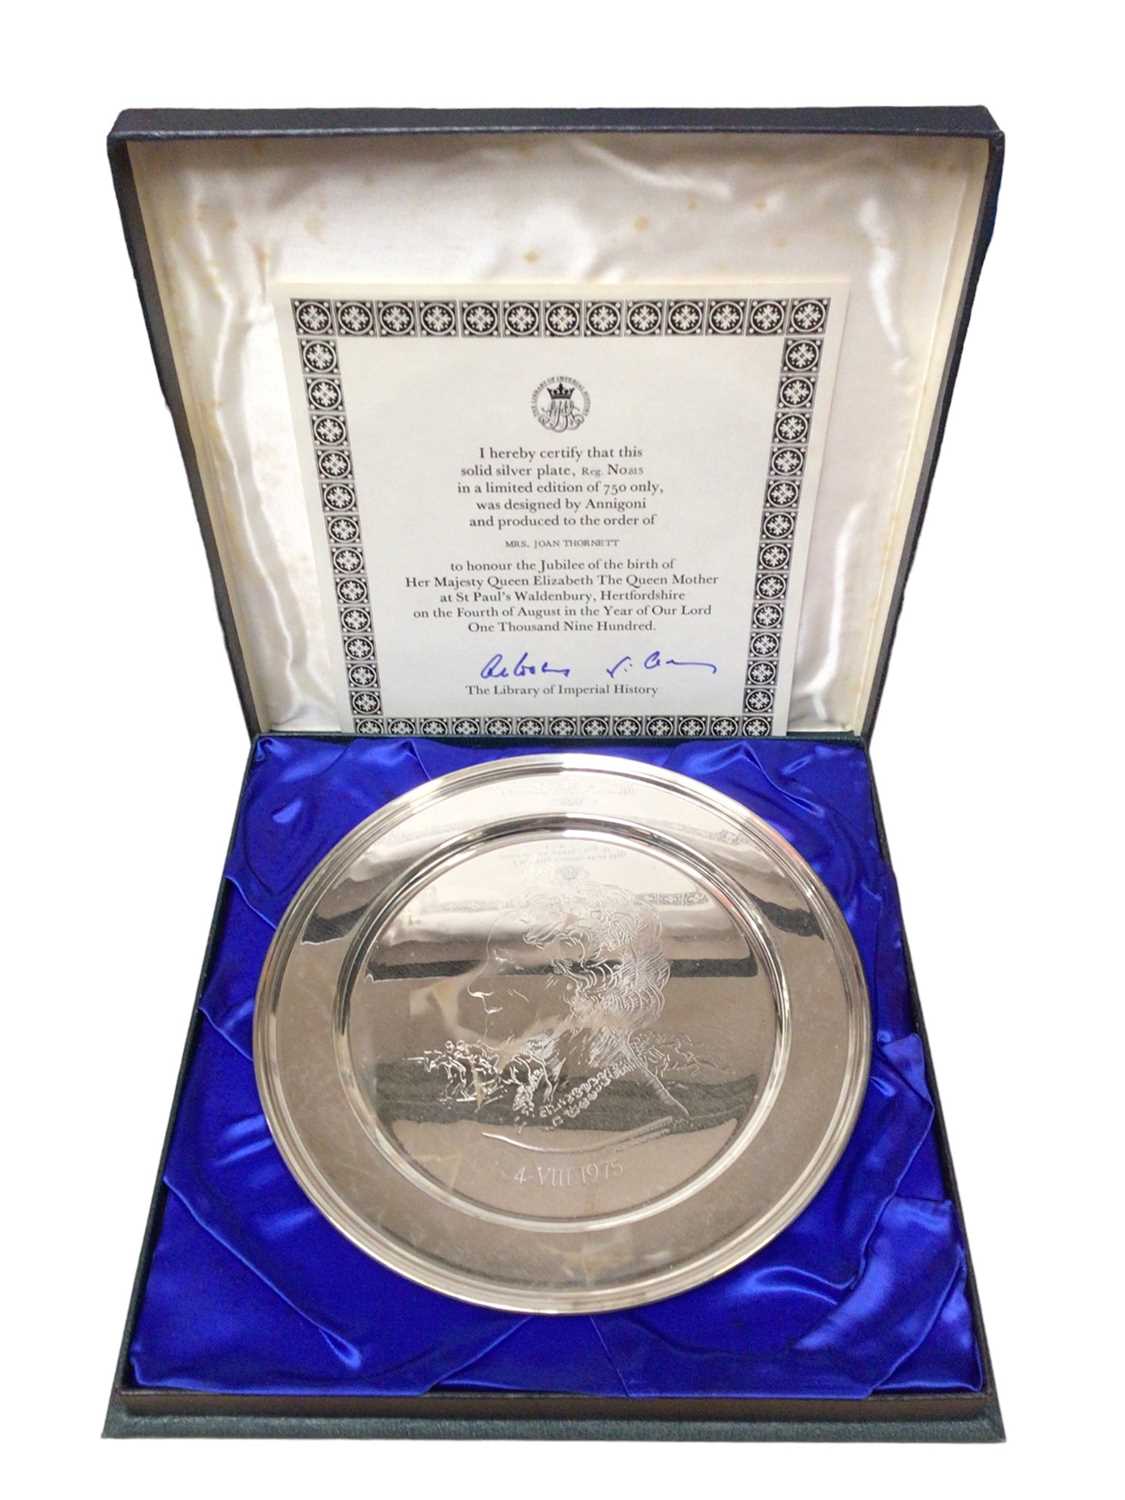 Lot 157 - Royal commemorative limited edition solid silver plate (London 1975) to honour the Jubilee of the birth of Her Majesty Queen Elizabeth The Queen Mother